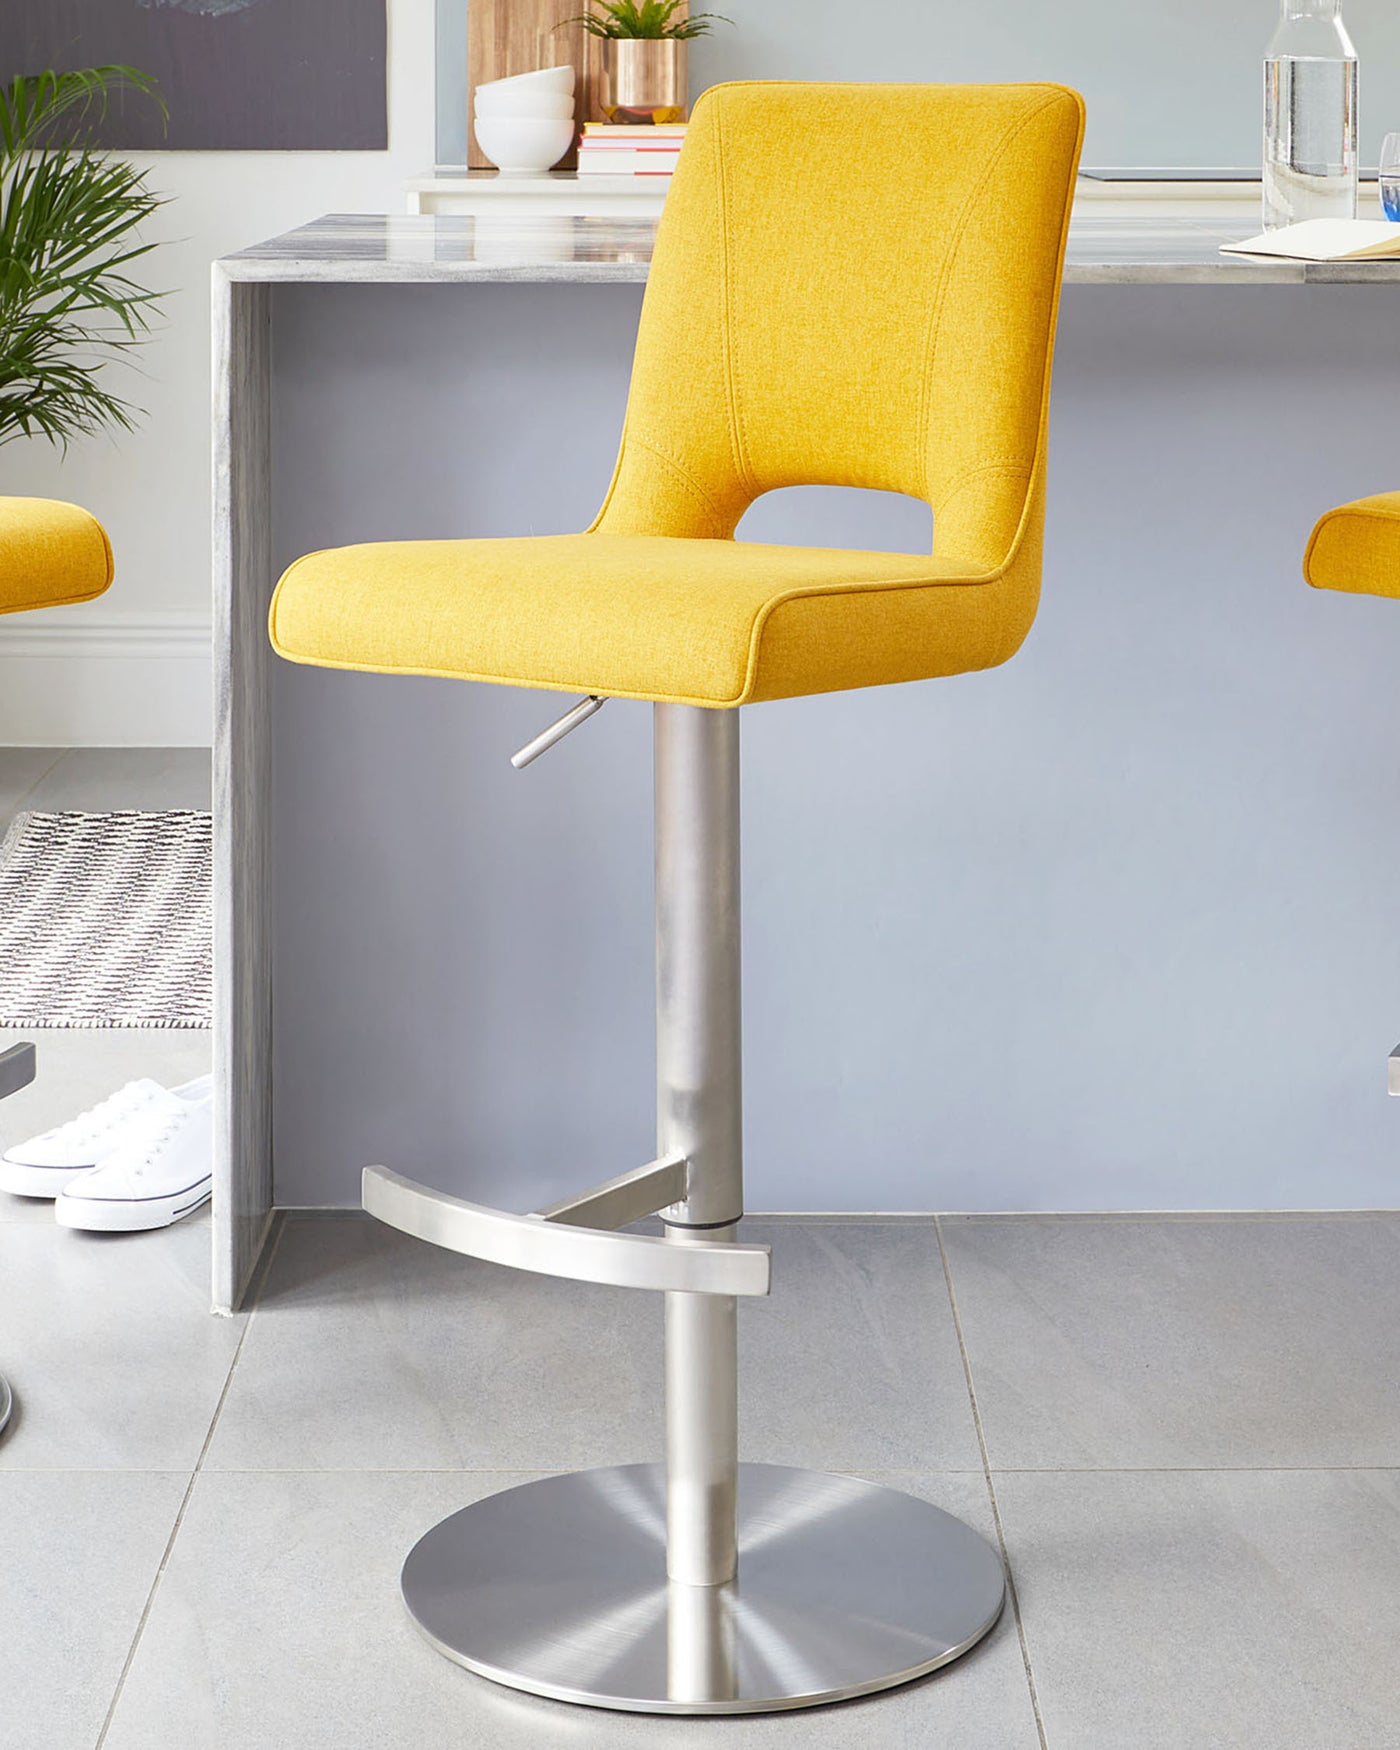 Modern adjustable-height barstool with a vibrant yellow upholstered seat, featuring clean lines, an ergonomic curved backrest with a cut-out detail, and a sleek metallic pedestal base.